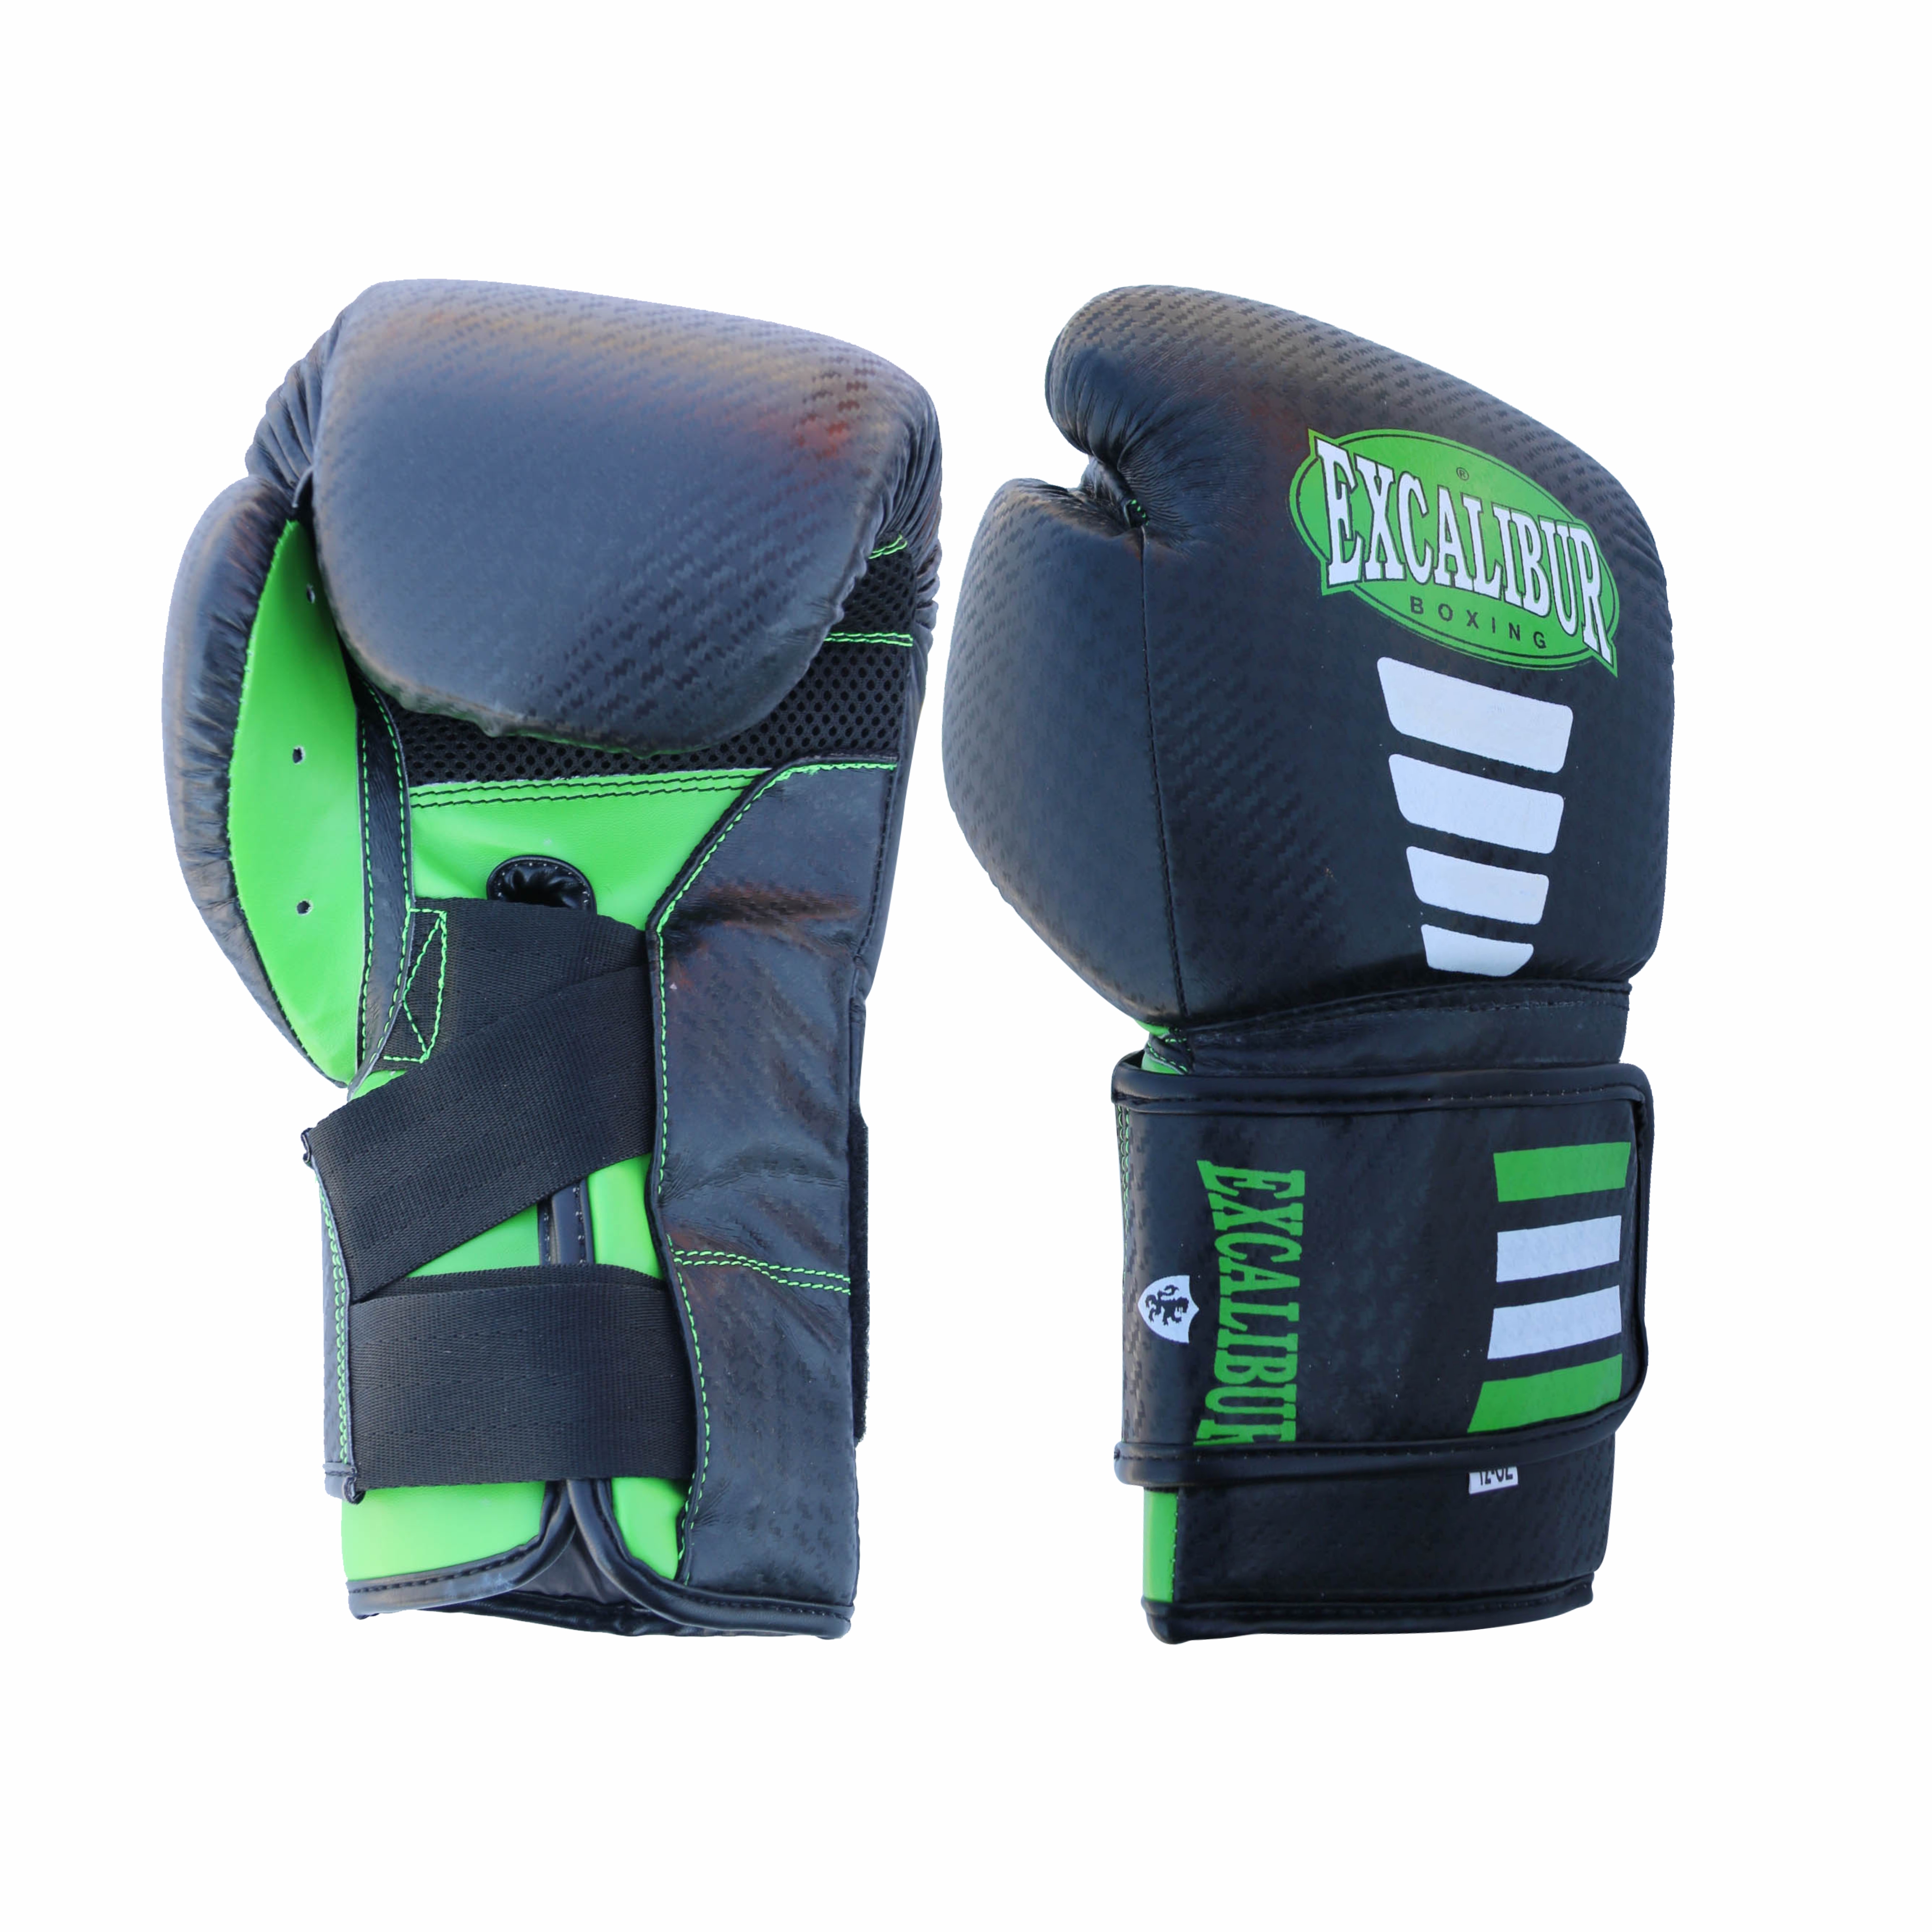 Cross Fit Boxing Gloves